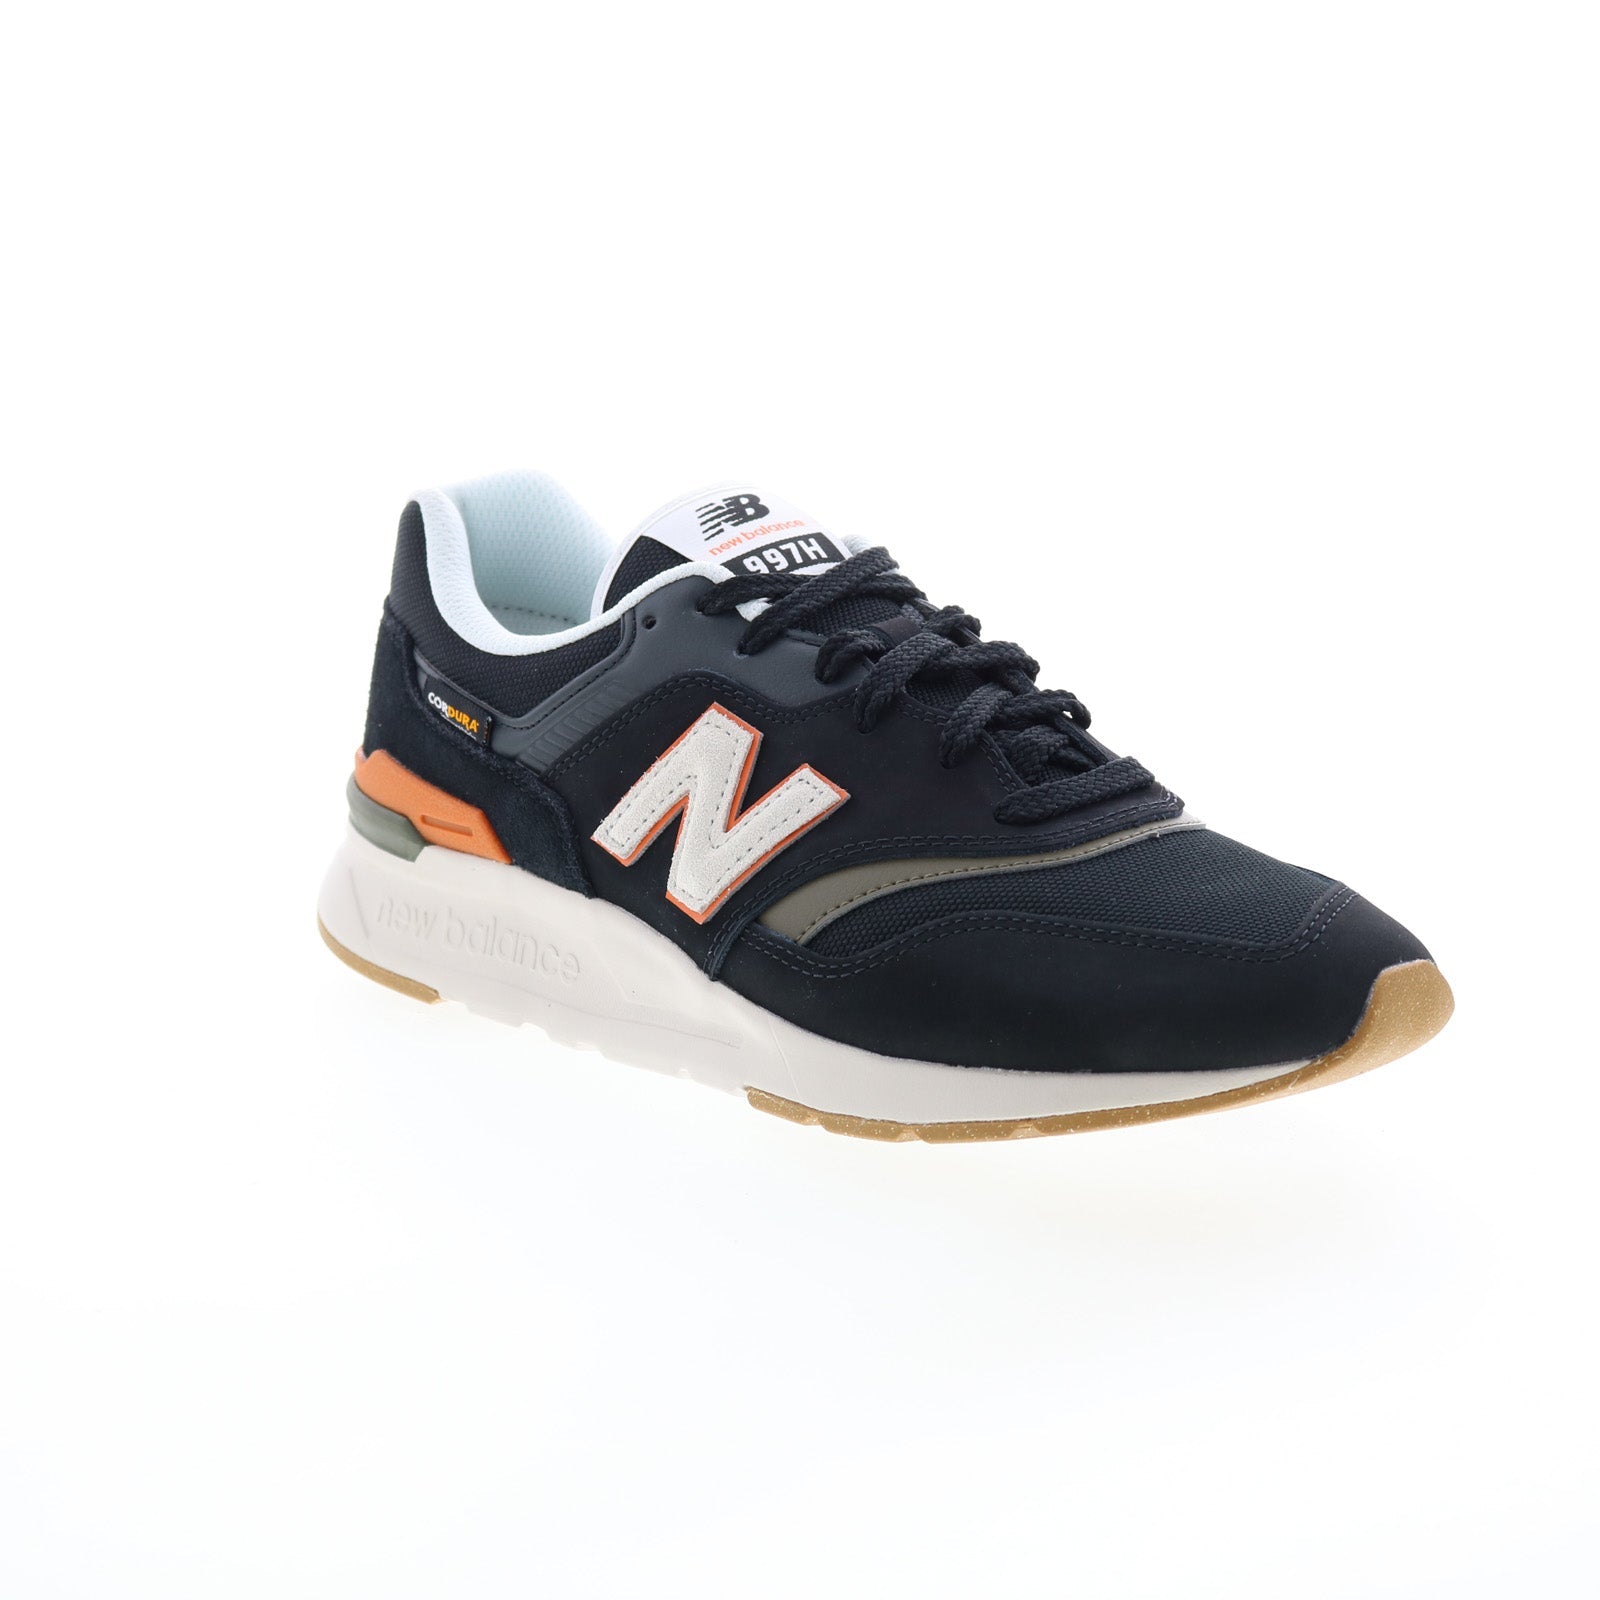 New Balance 997H CM997HLP Mens Black Leather Lace Up Lifestyle Sneaker ...